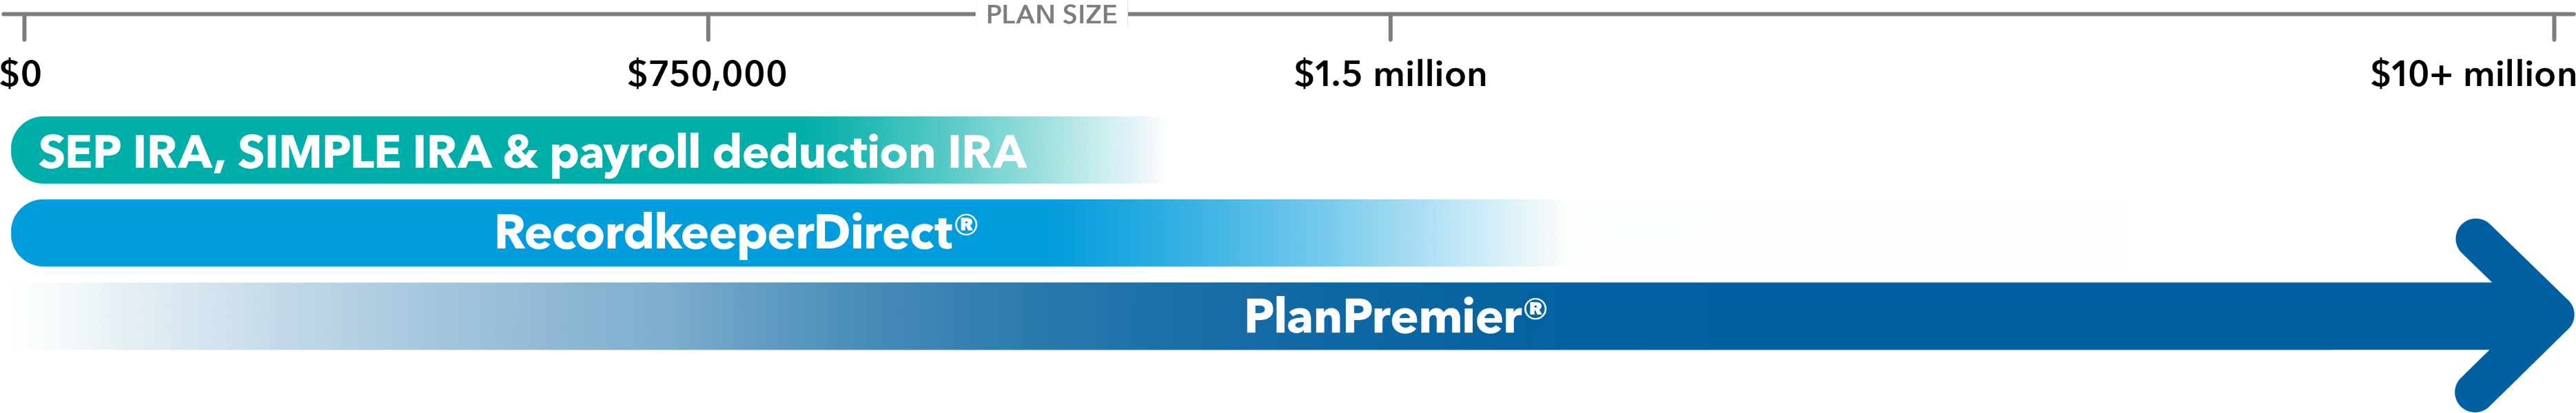 Graphic shows the suggested target plan size (assets) for SEP IRA, SIMPLE IRA and payroll deduction IRA plans ranges from $0 to about $1 million, for RecordkeeperDirect plans ranges from $0 to over $1.5 million, and for PlanPremier plans ranges from about $0 to over $10 million.